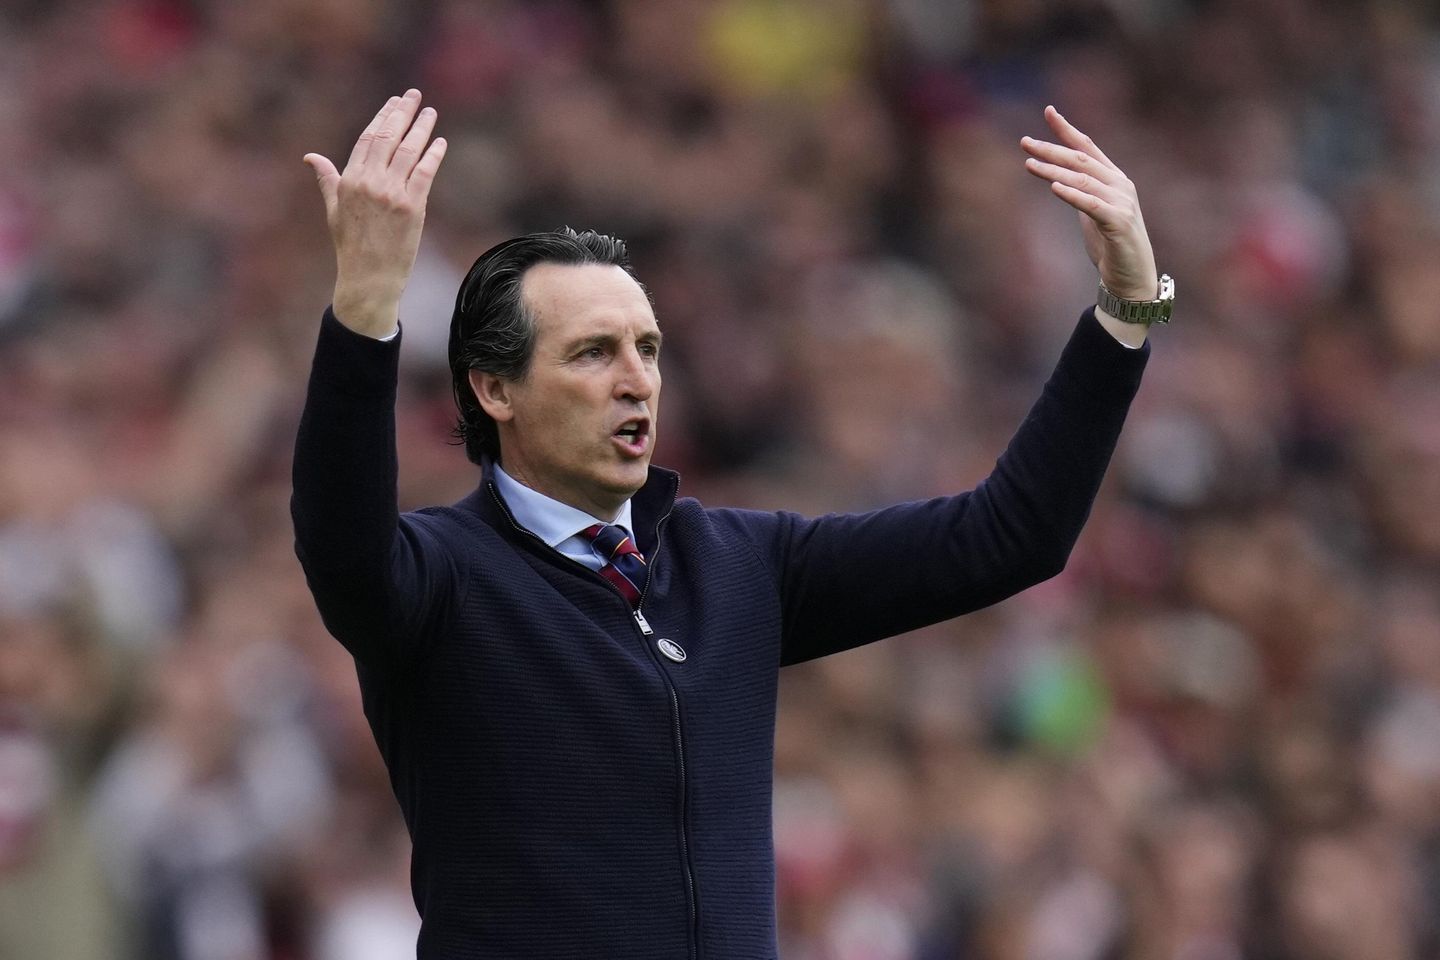 Three of soccer's top clubs need a new coach. Unai Emery off the market after Aston Villa extension
